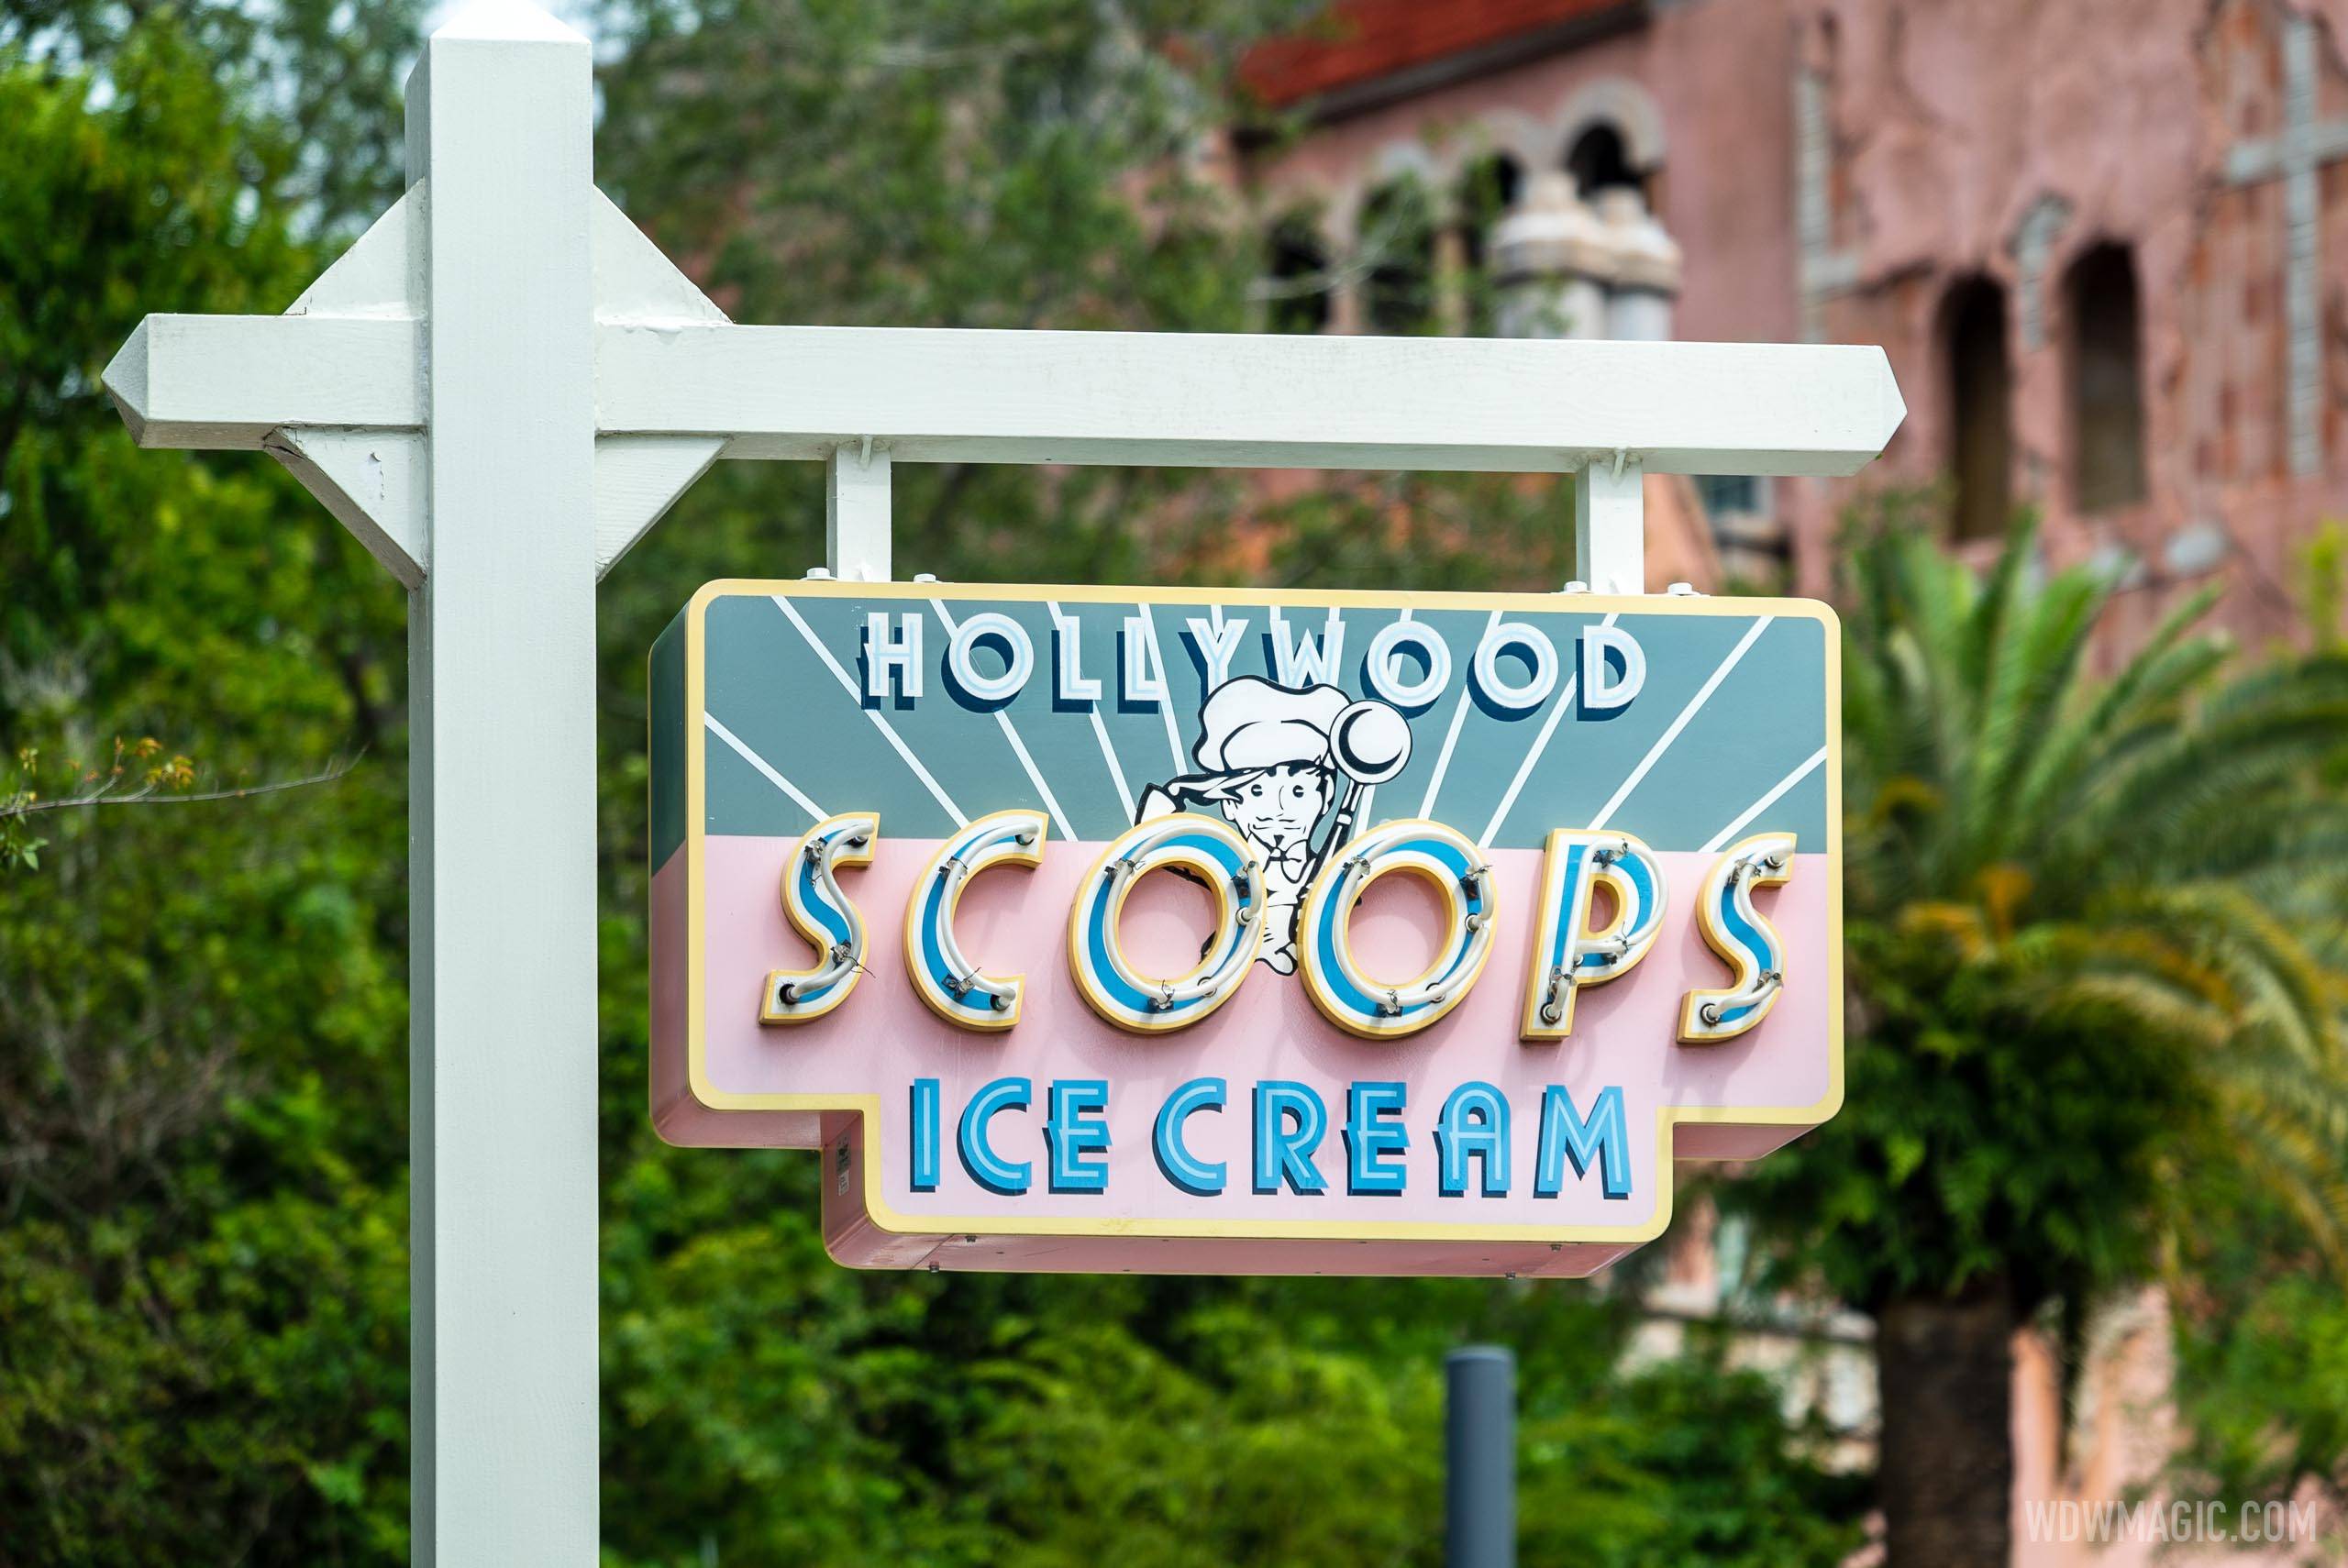 Hollywood Scoops Ice Cream overview